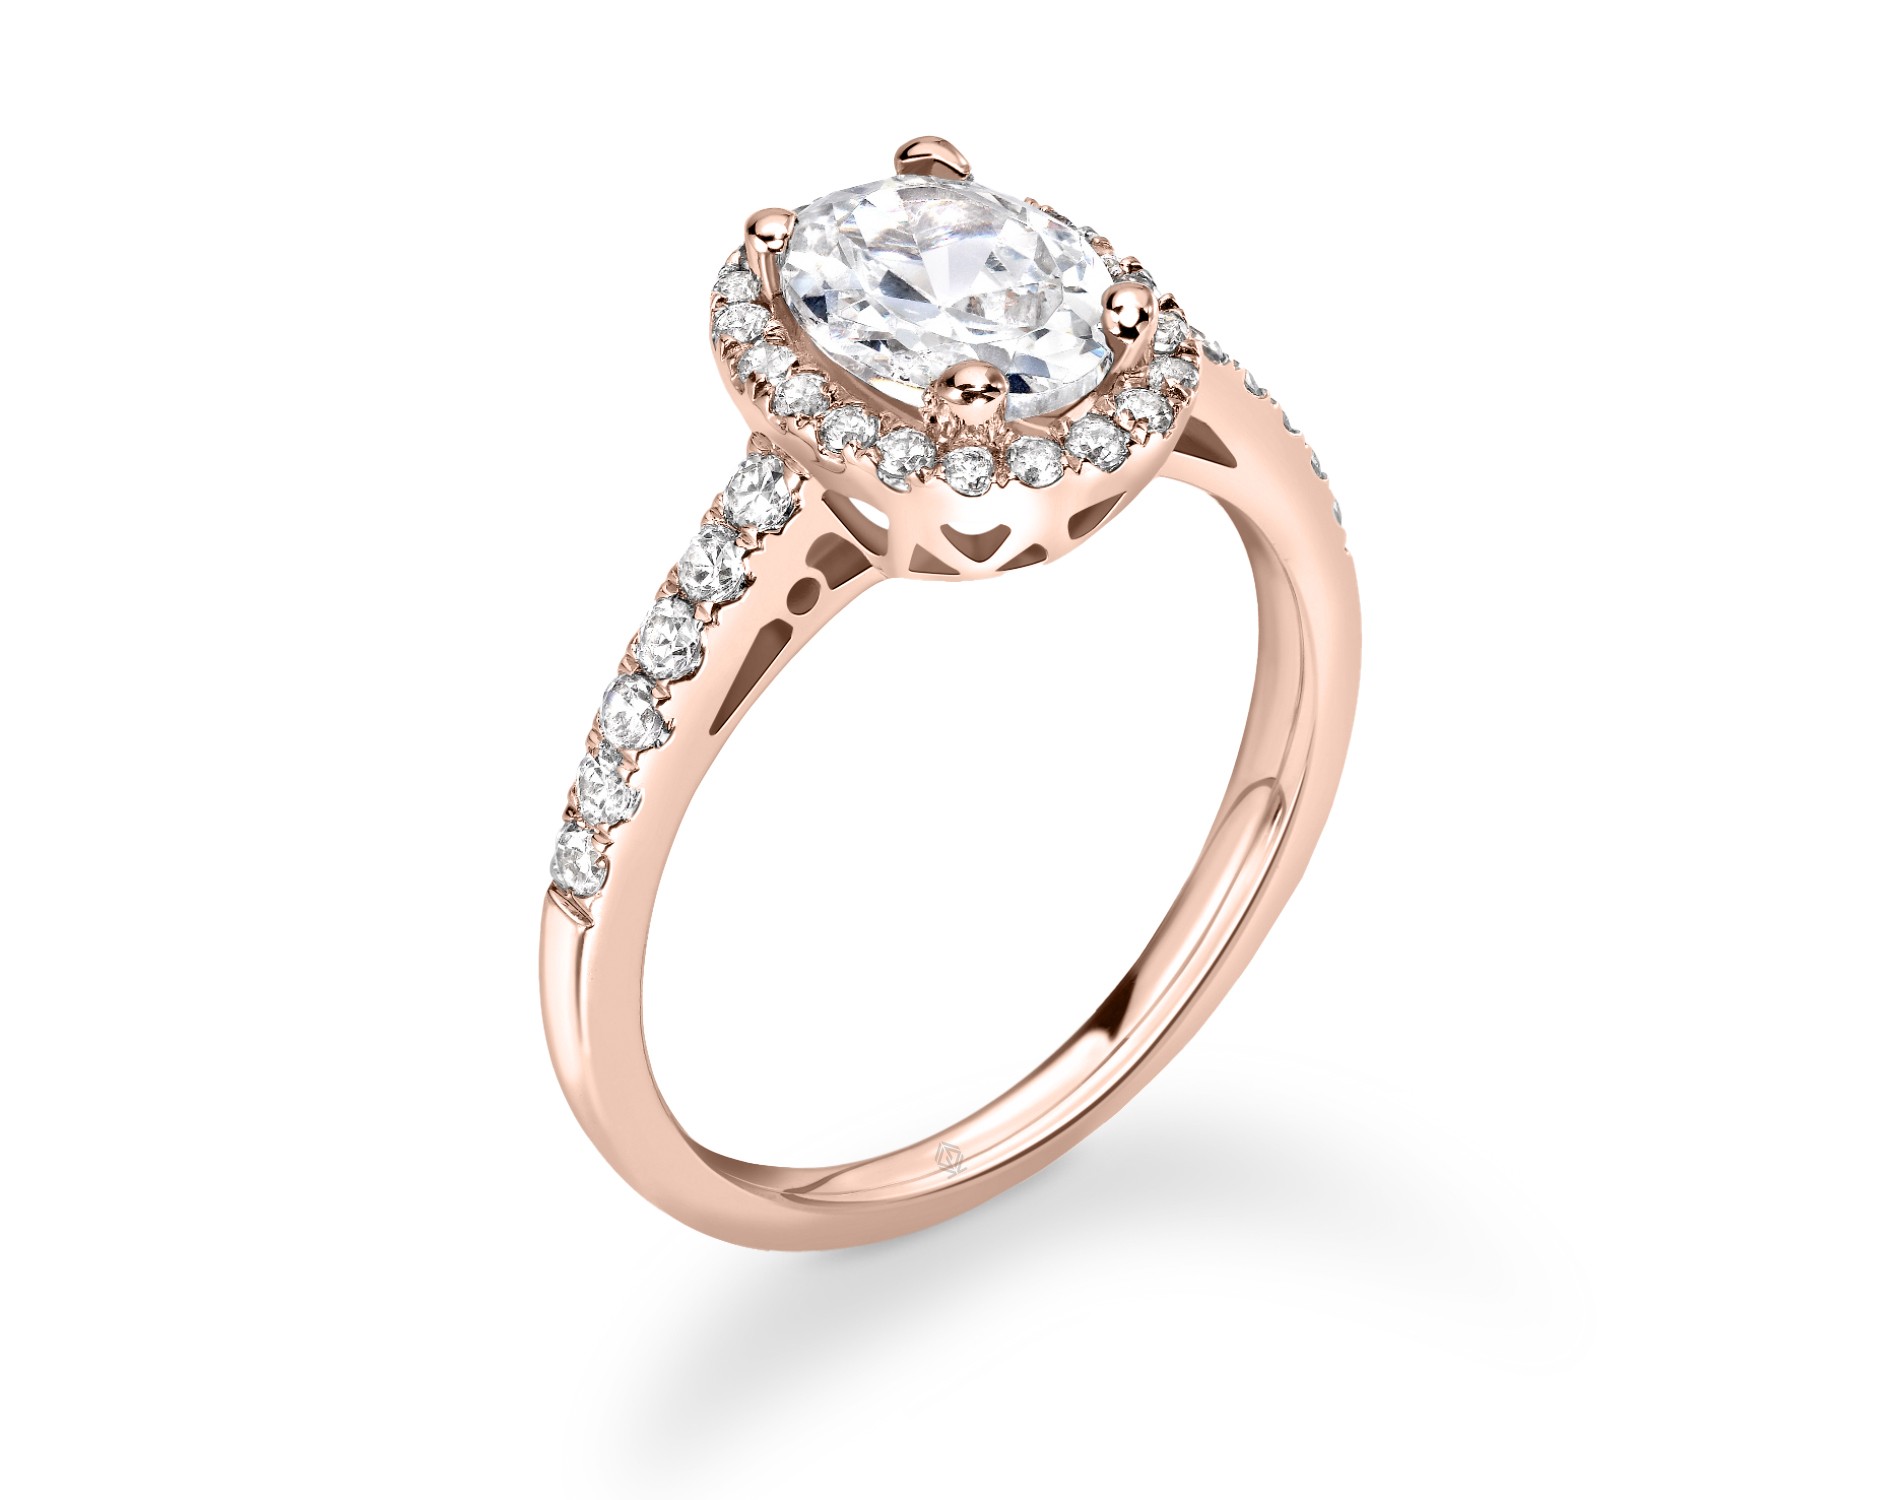 18K ROSE GOLD OVAL CUT HALO DIAMOND RING WITH SIDE STONES PAVE SET